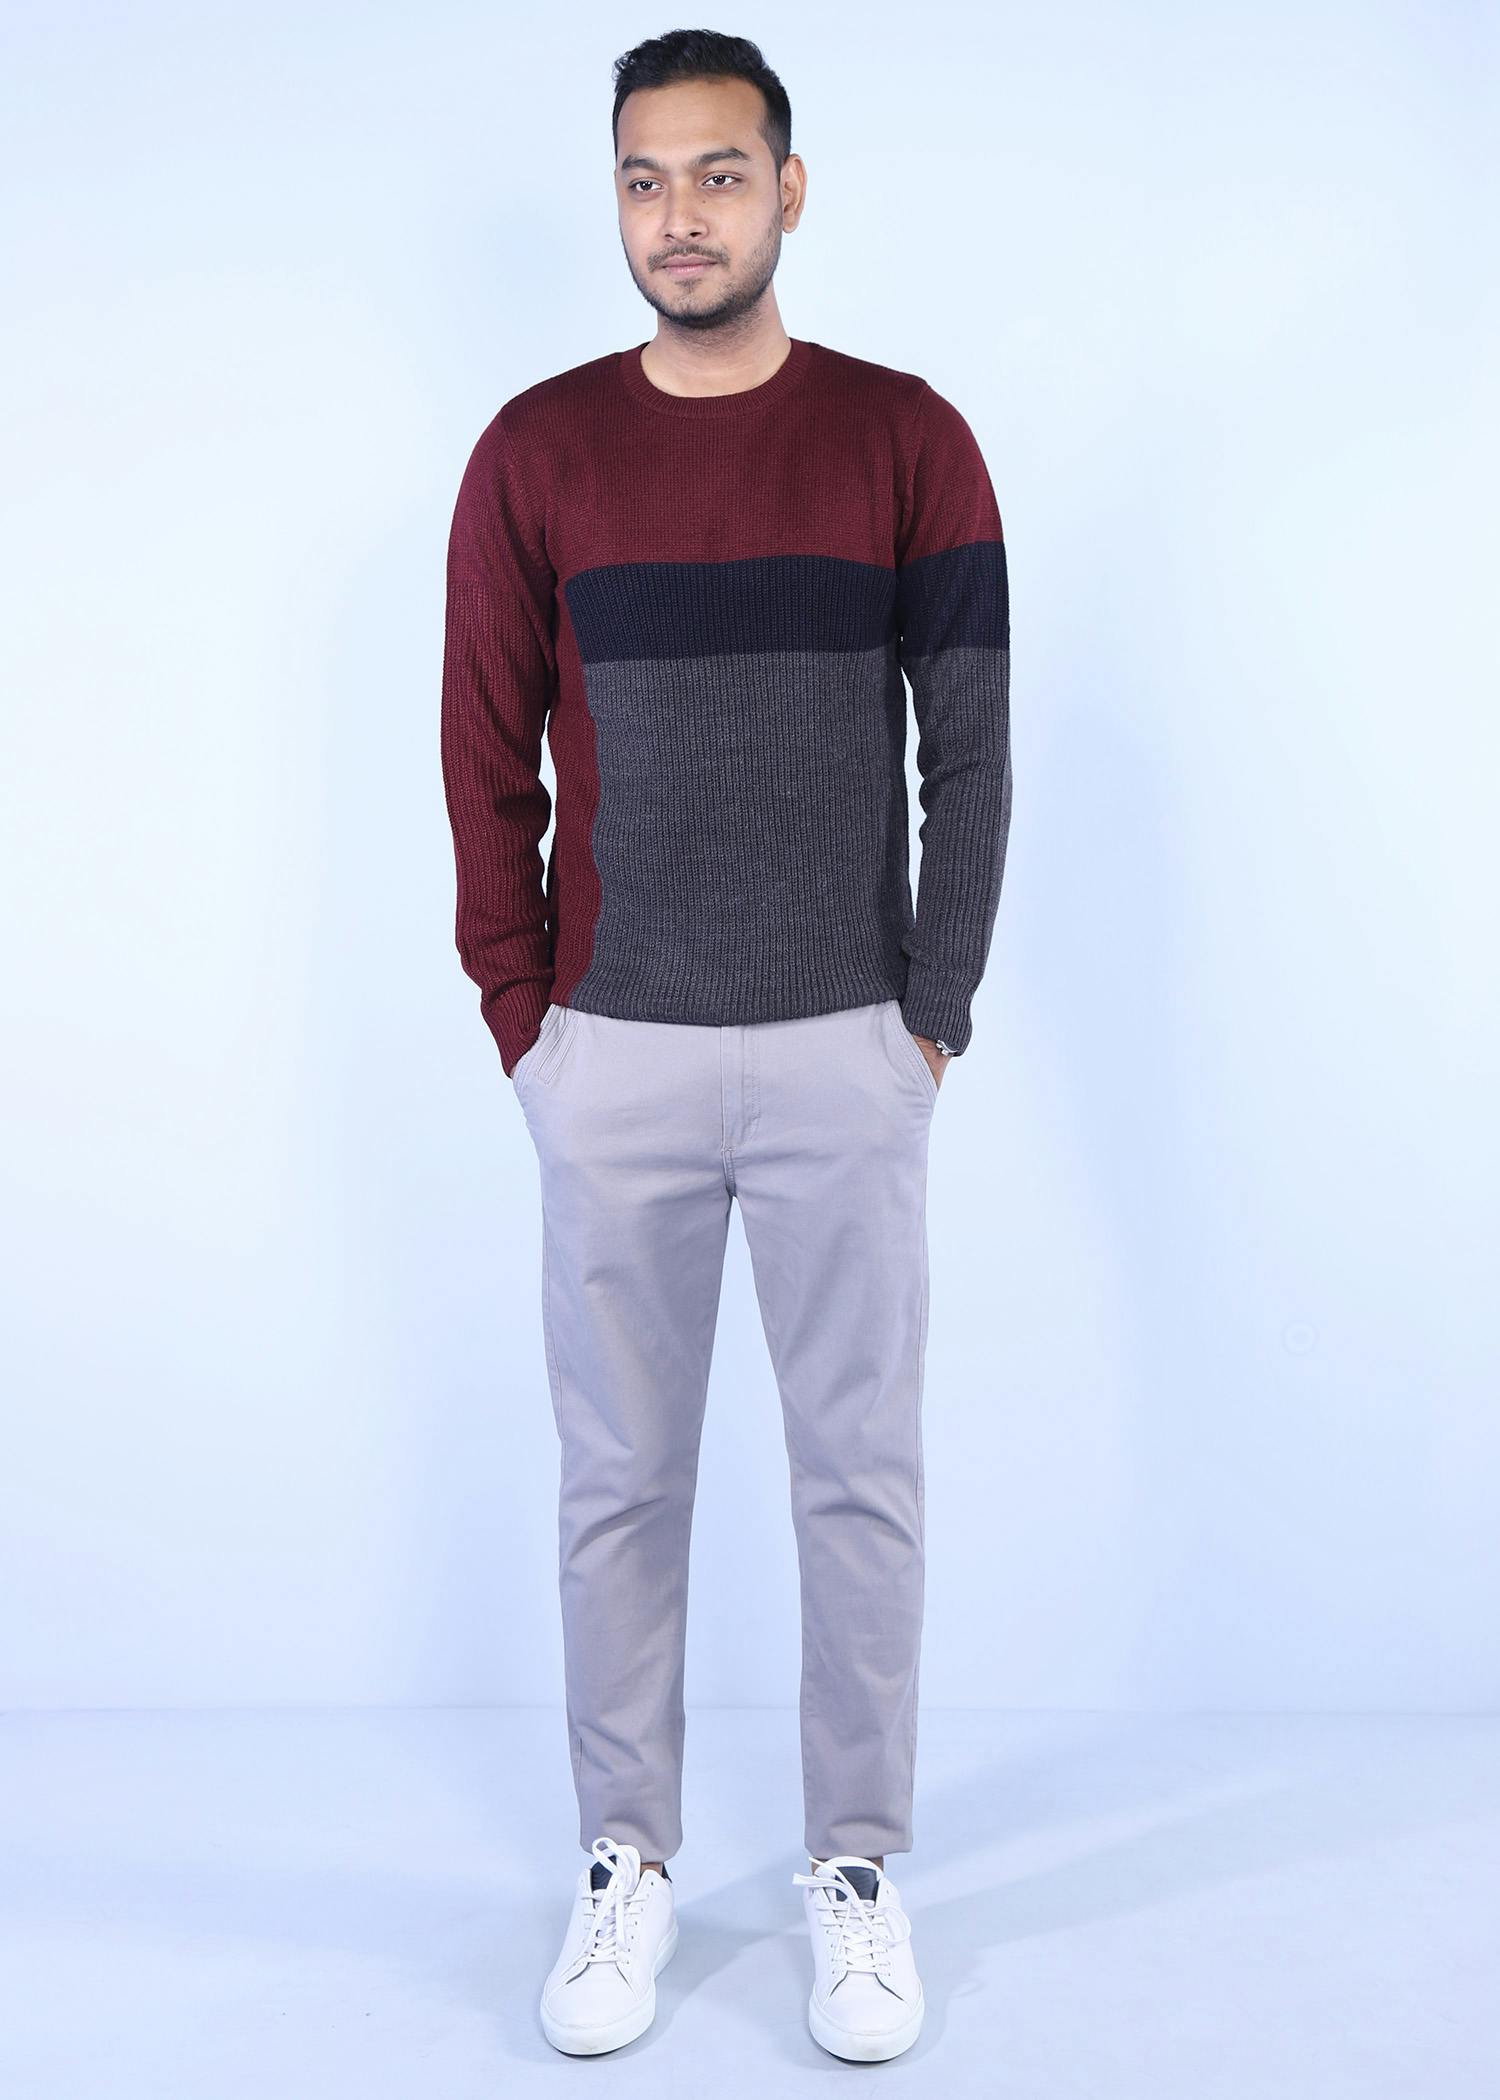 hillstar iv sweater bordeaux color full front view